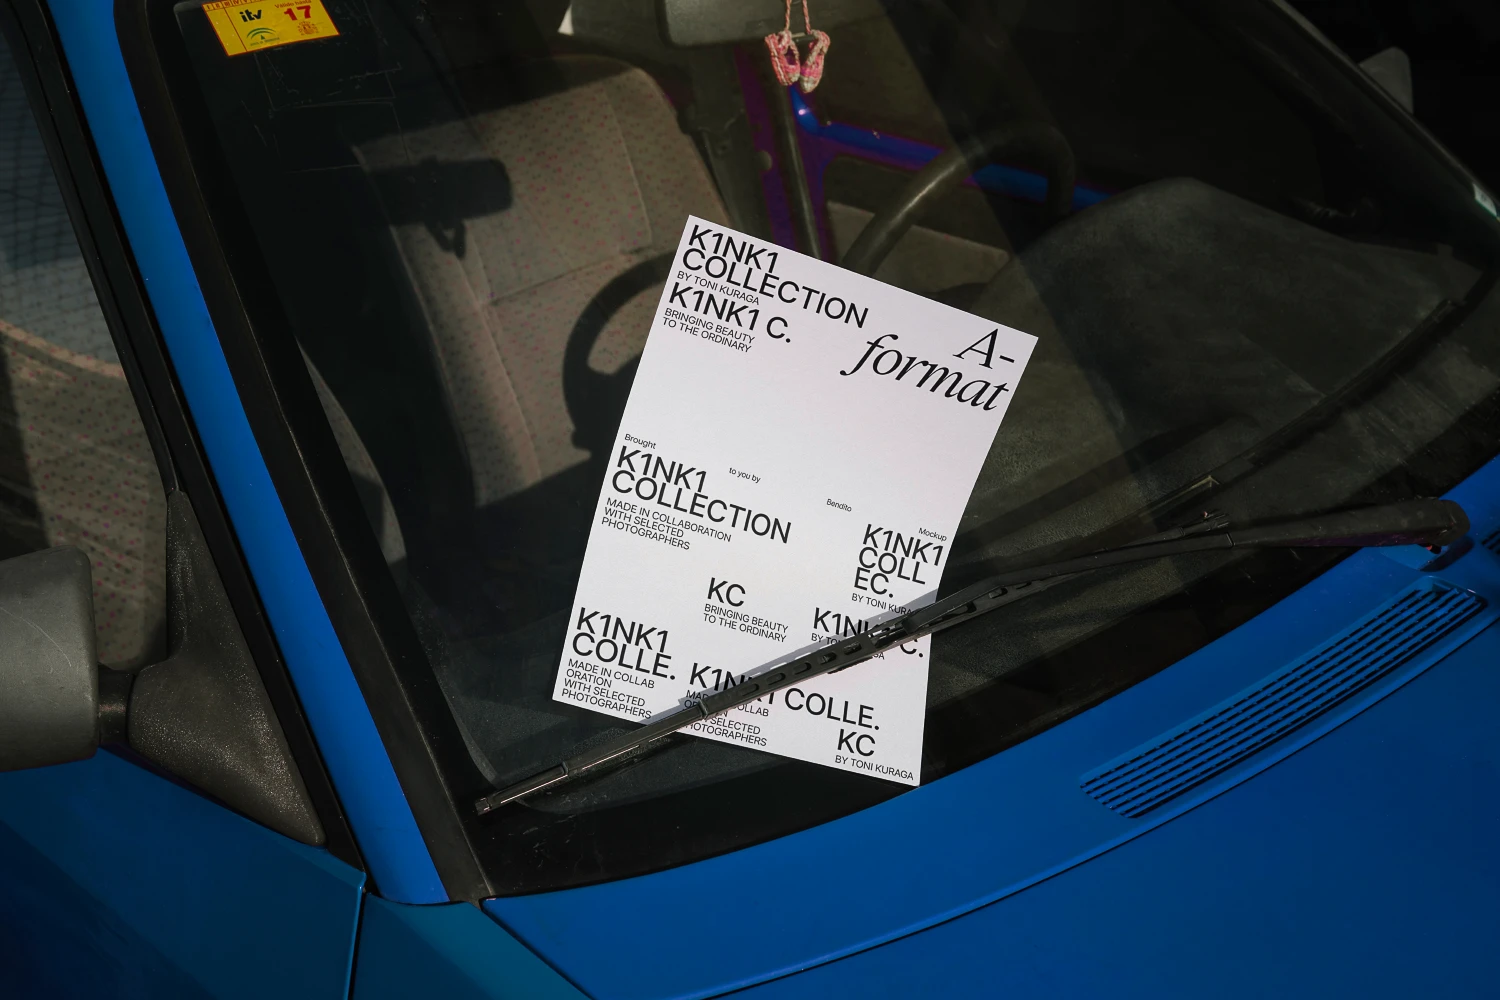 Mockup poster hanging by the wiper blade of a car.